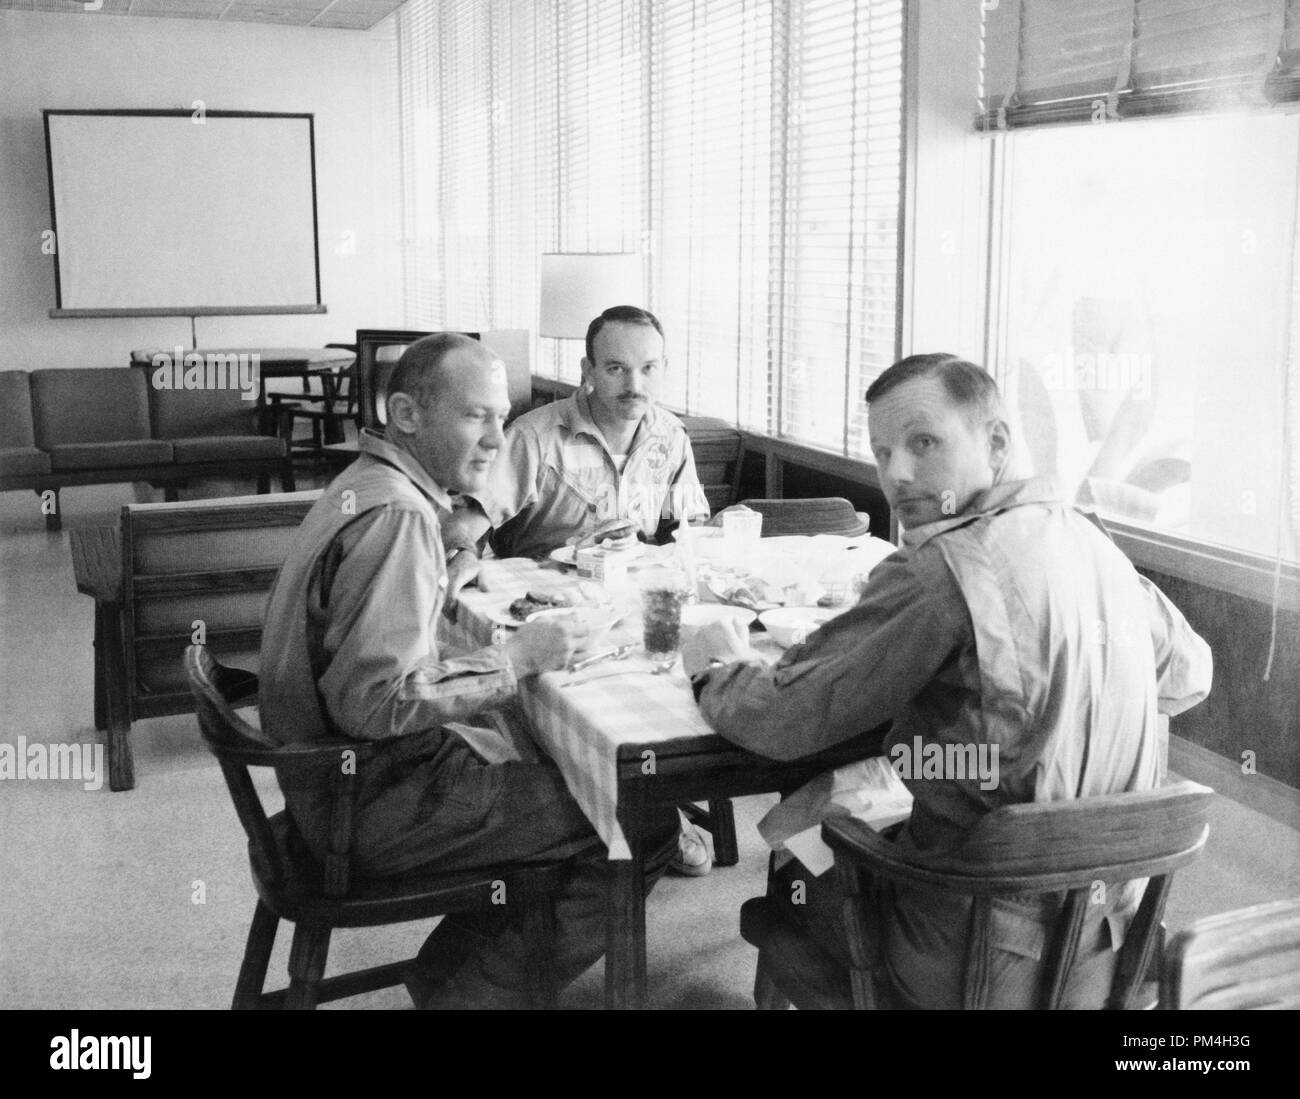 The crew of the Apollo 11 mission is seen dining in the Crew Reception Area of the Lunar Receiving Laboratory after the Apollo 11 mission. Left to right, are Astronauts Buzz Aldrin, Michael Collins, and Neil Armstrong, 1969.  File Reference # 1003 205THA Stock Photo